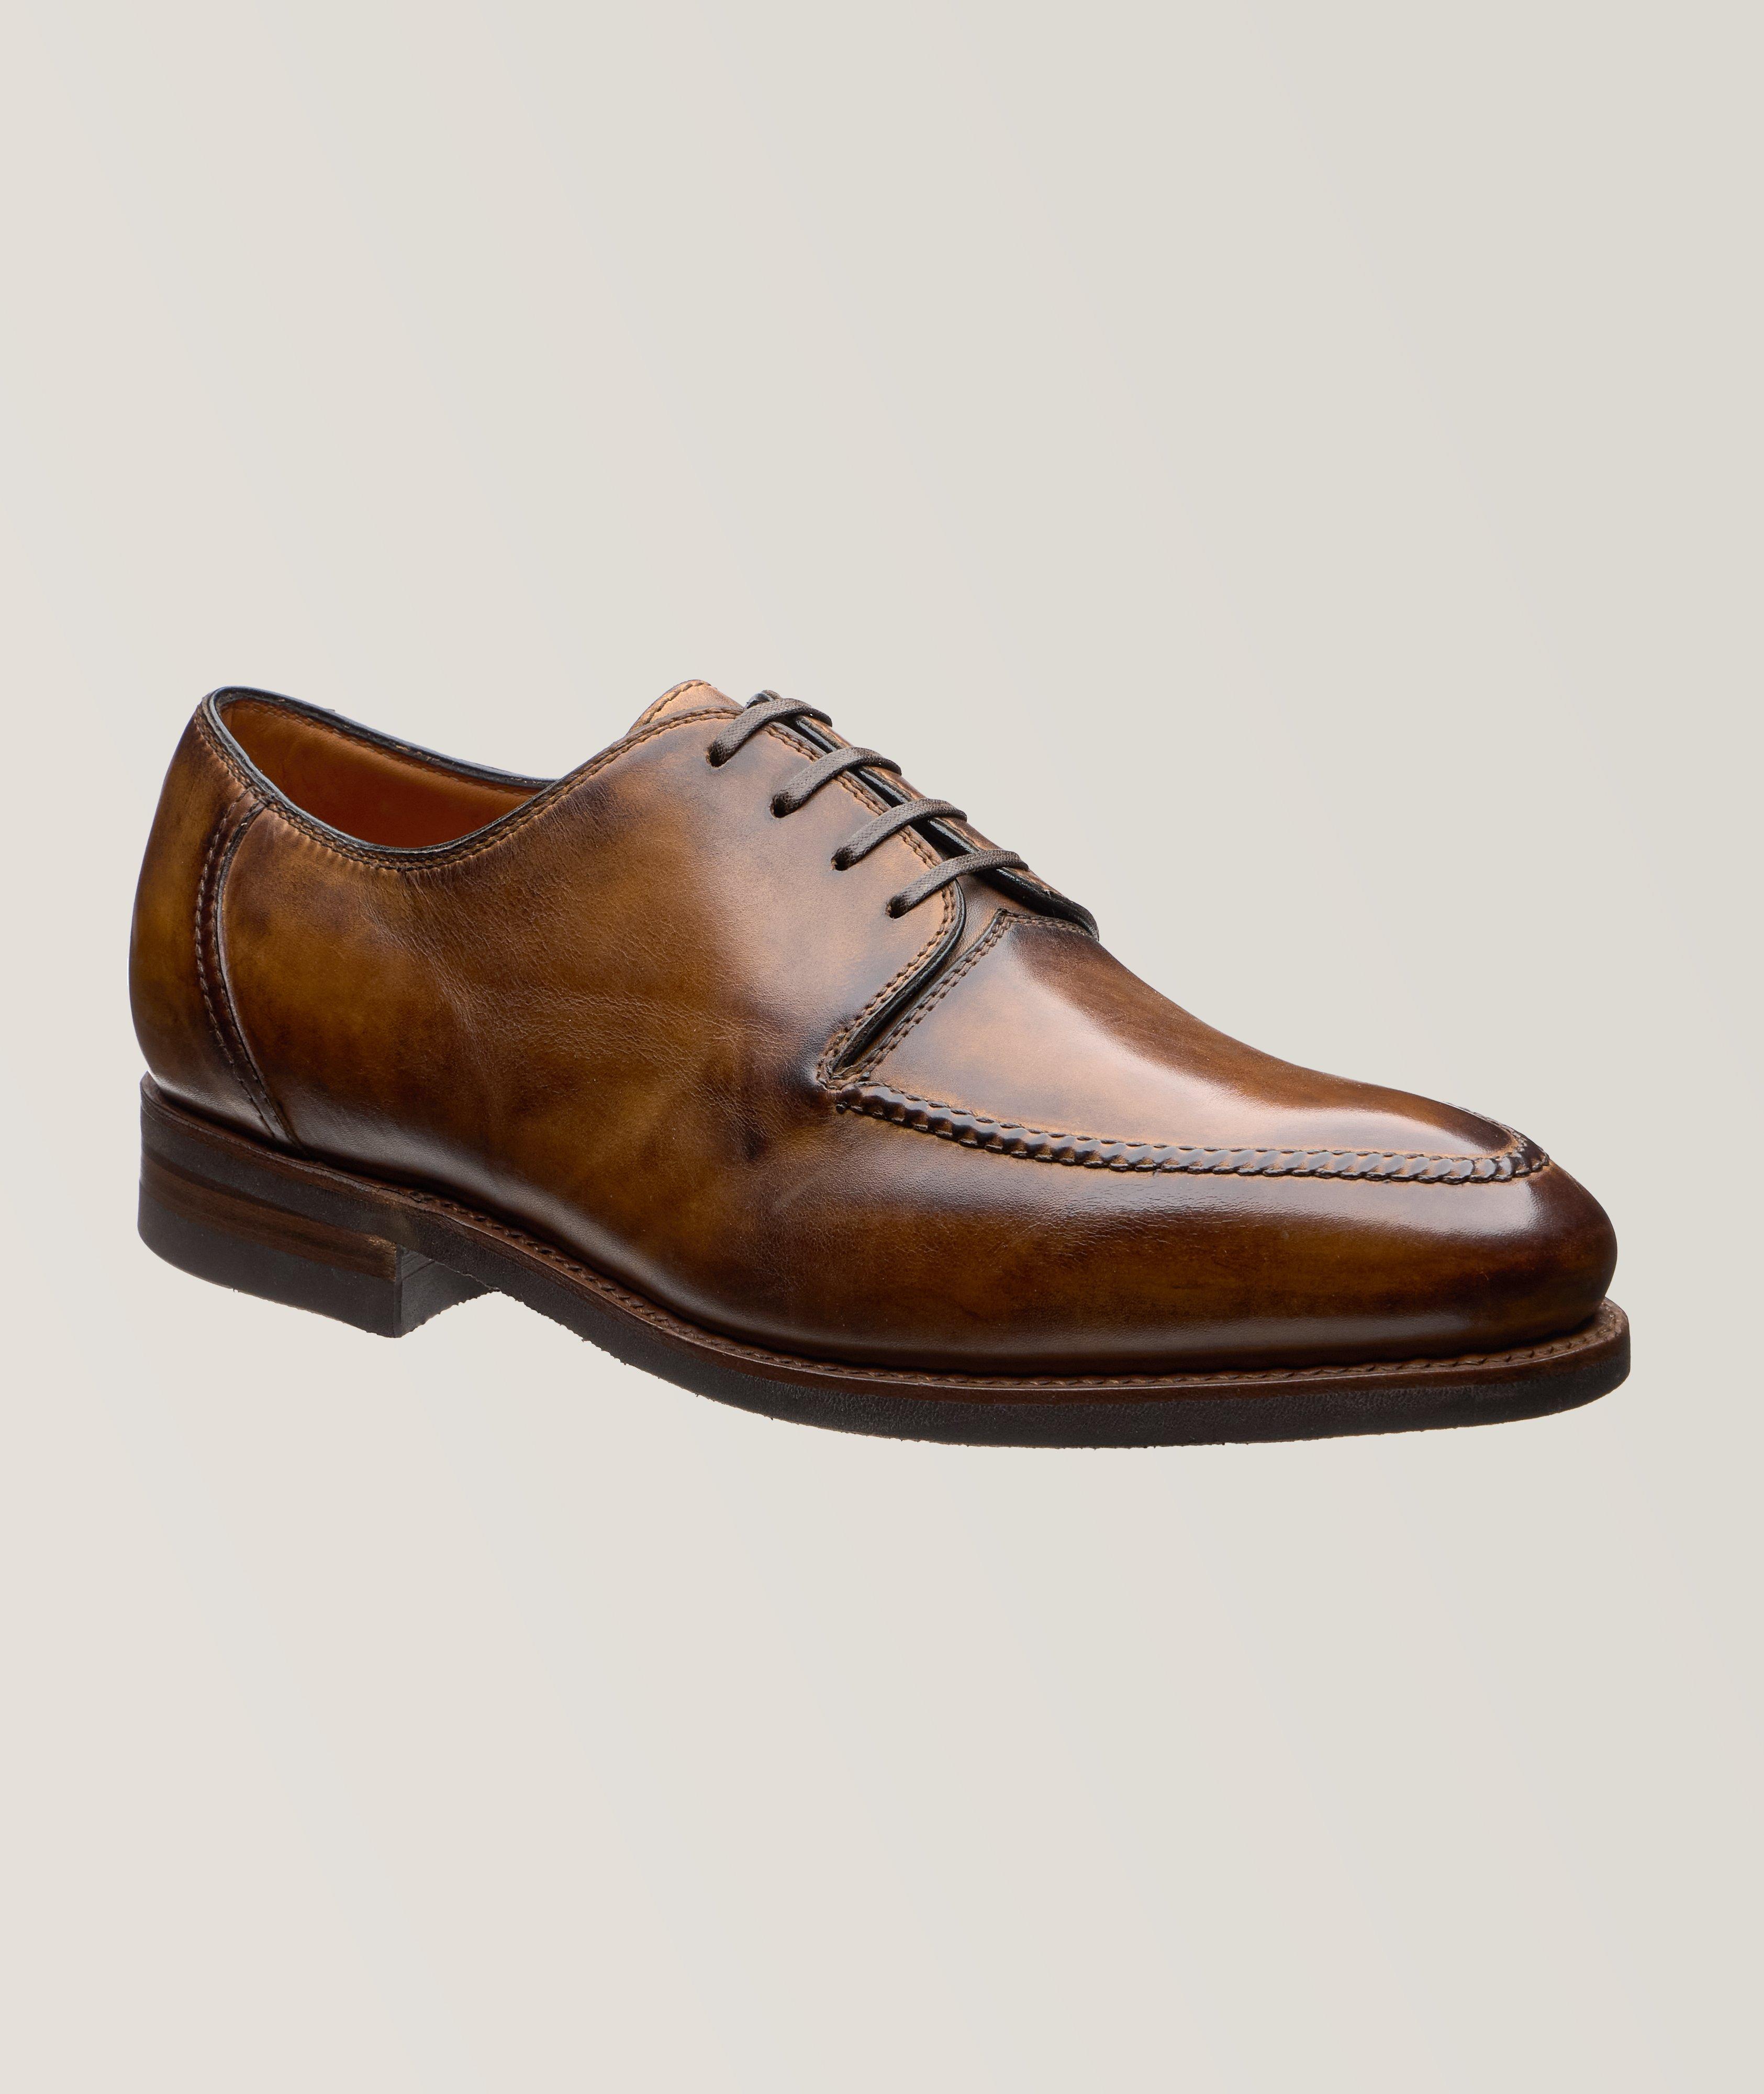 Squisto Burnished Leather Derbies image 0